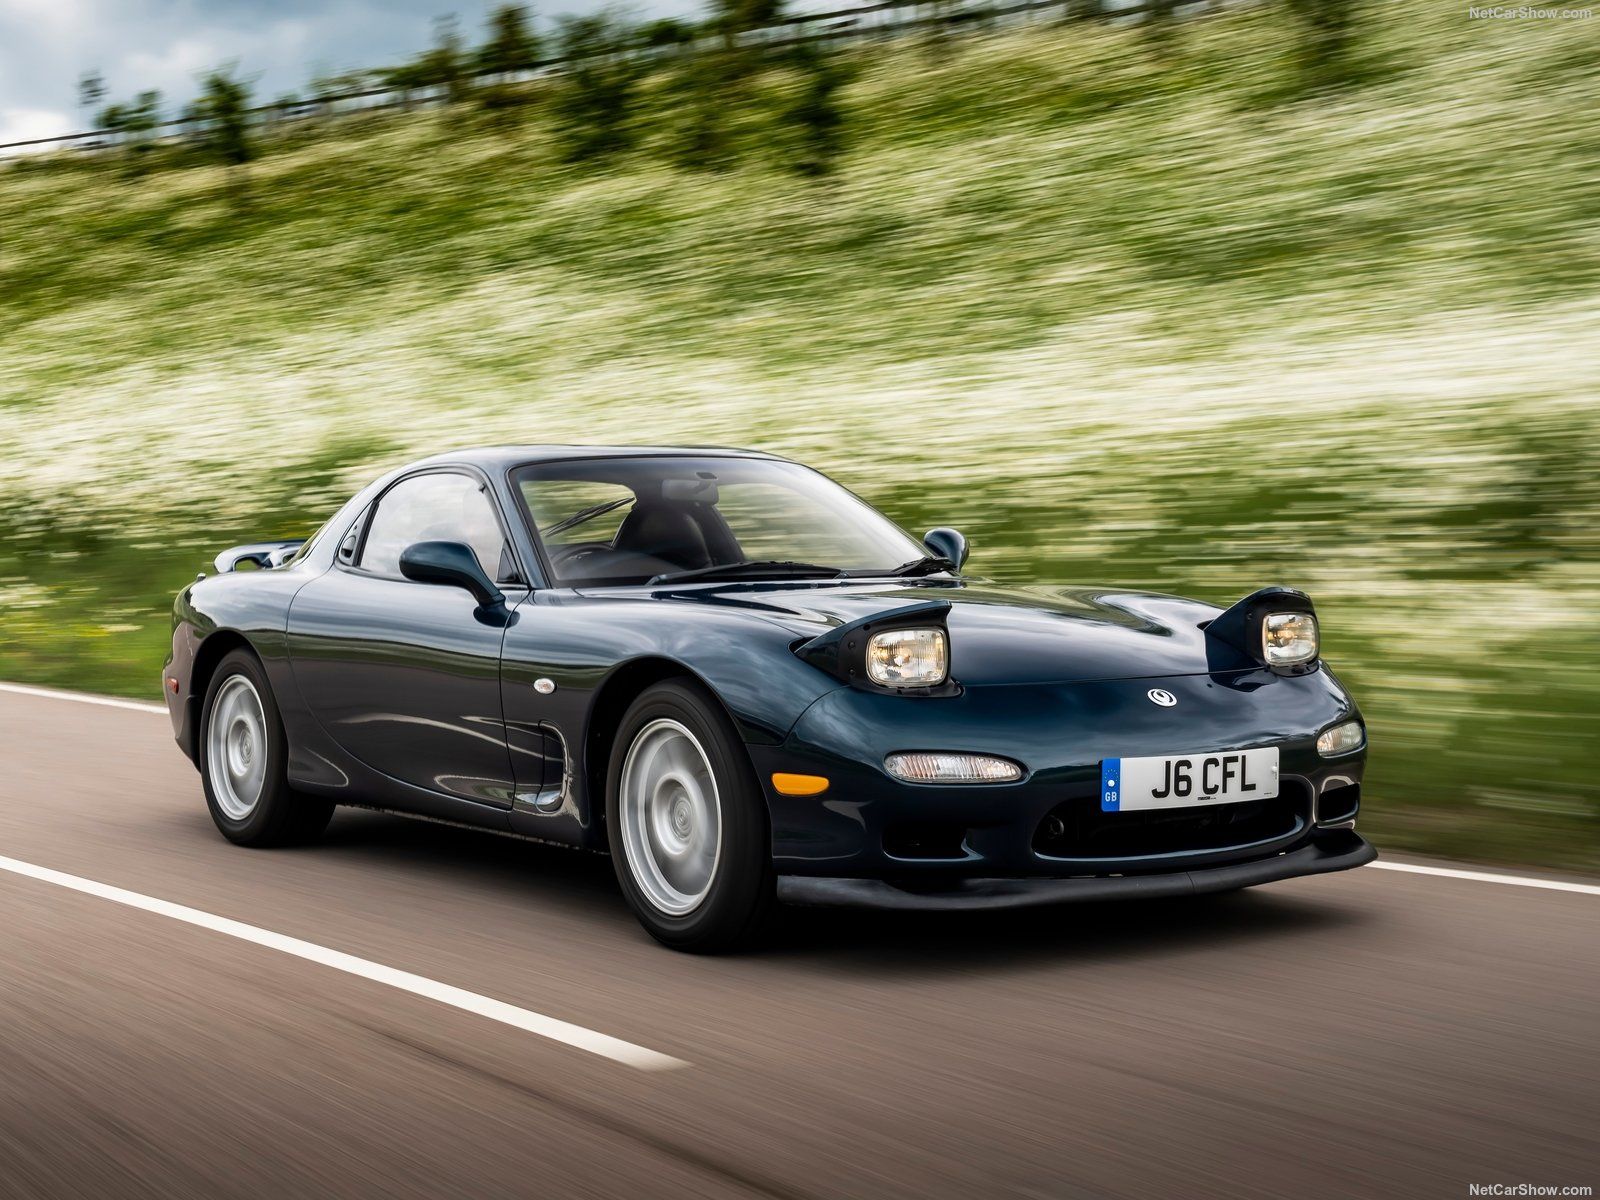 Mazda RX-7 FD, black, on road, front quarter view